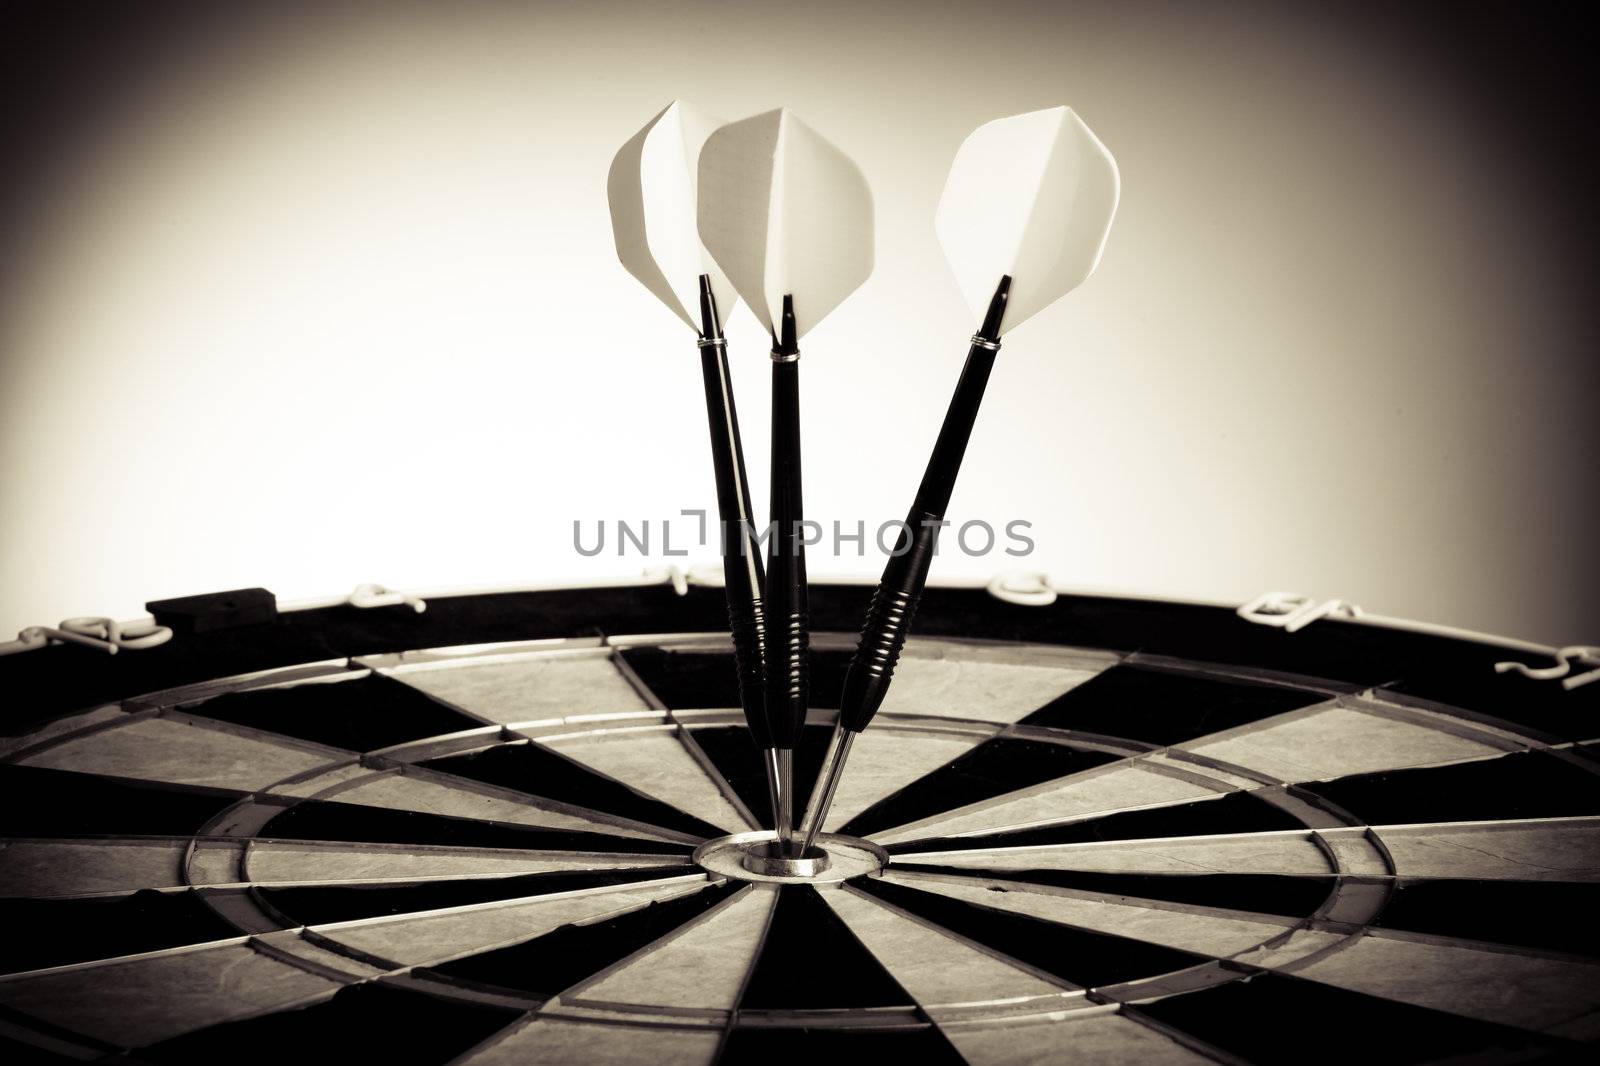 Perspective Photo Of Three Arrows On Darts Table by nfx702